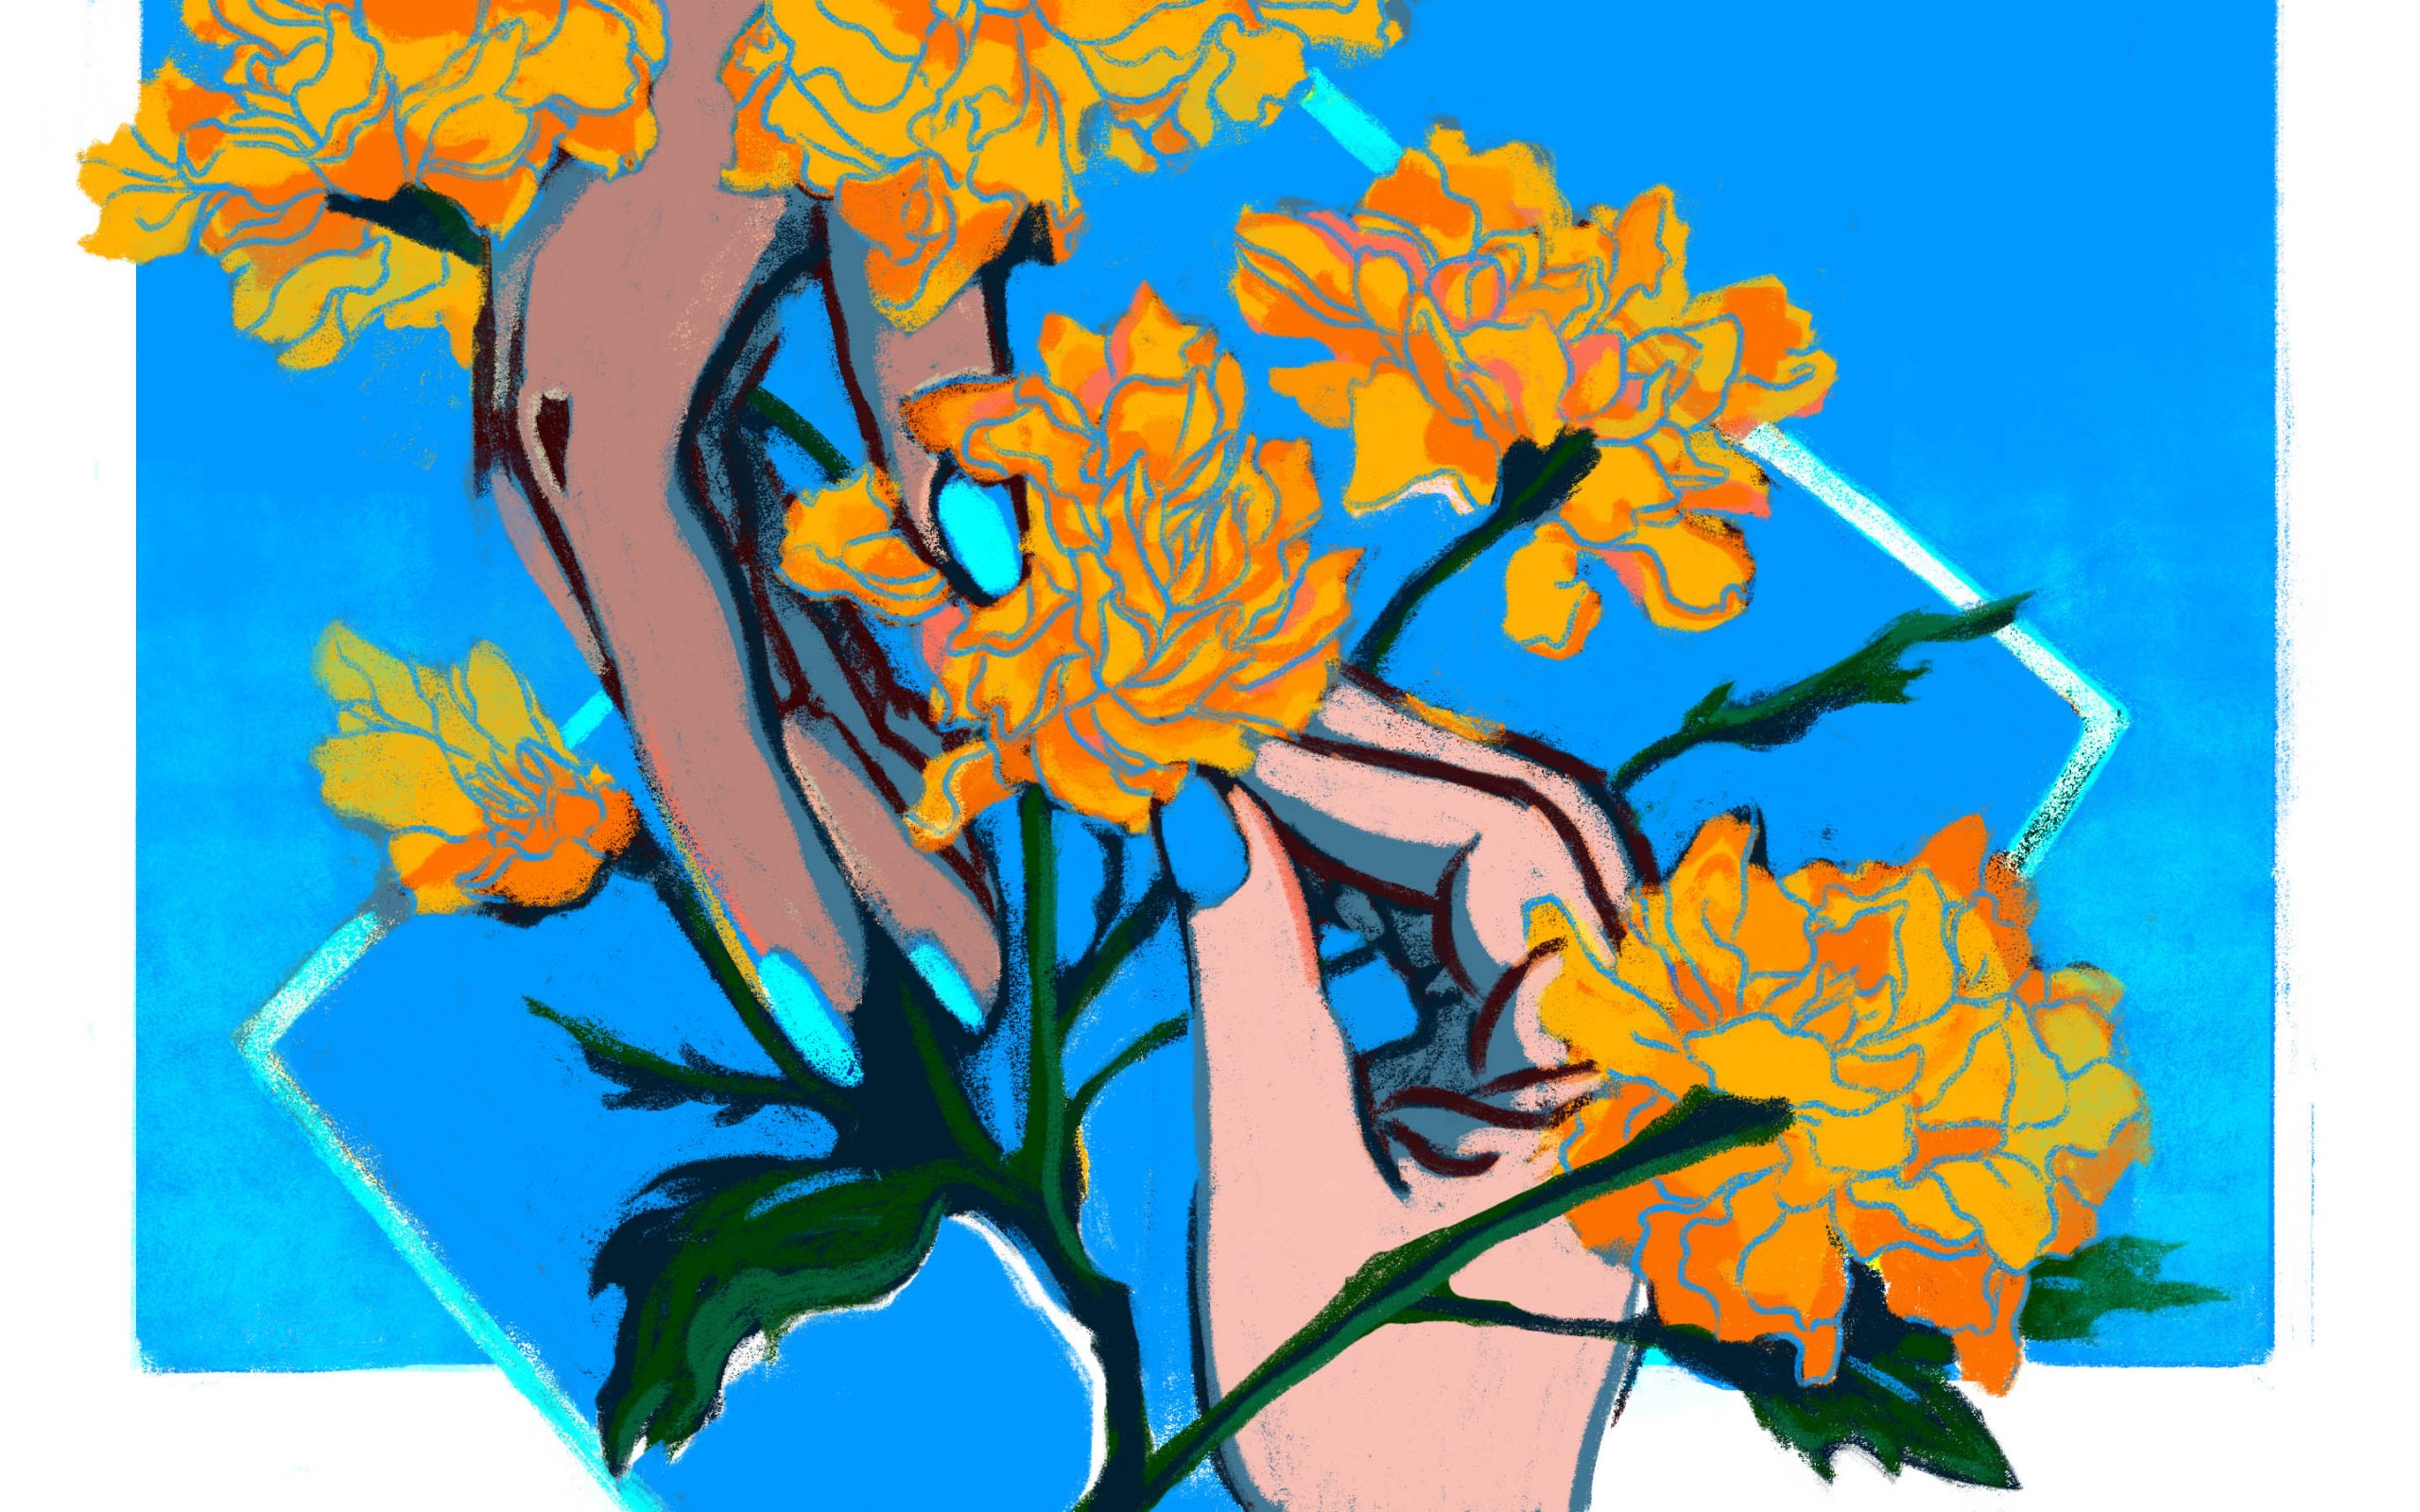 A drawing of two hands coming together through flowers